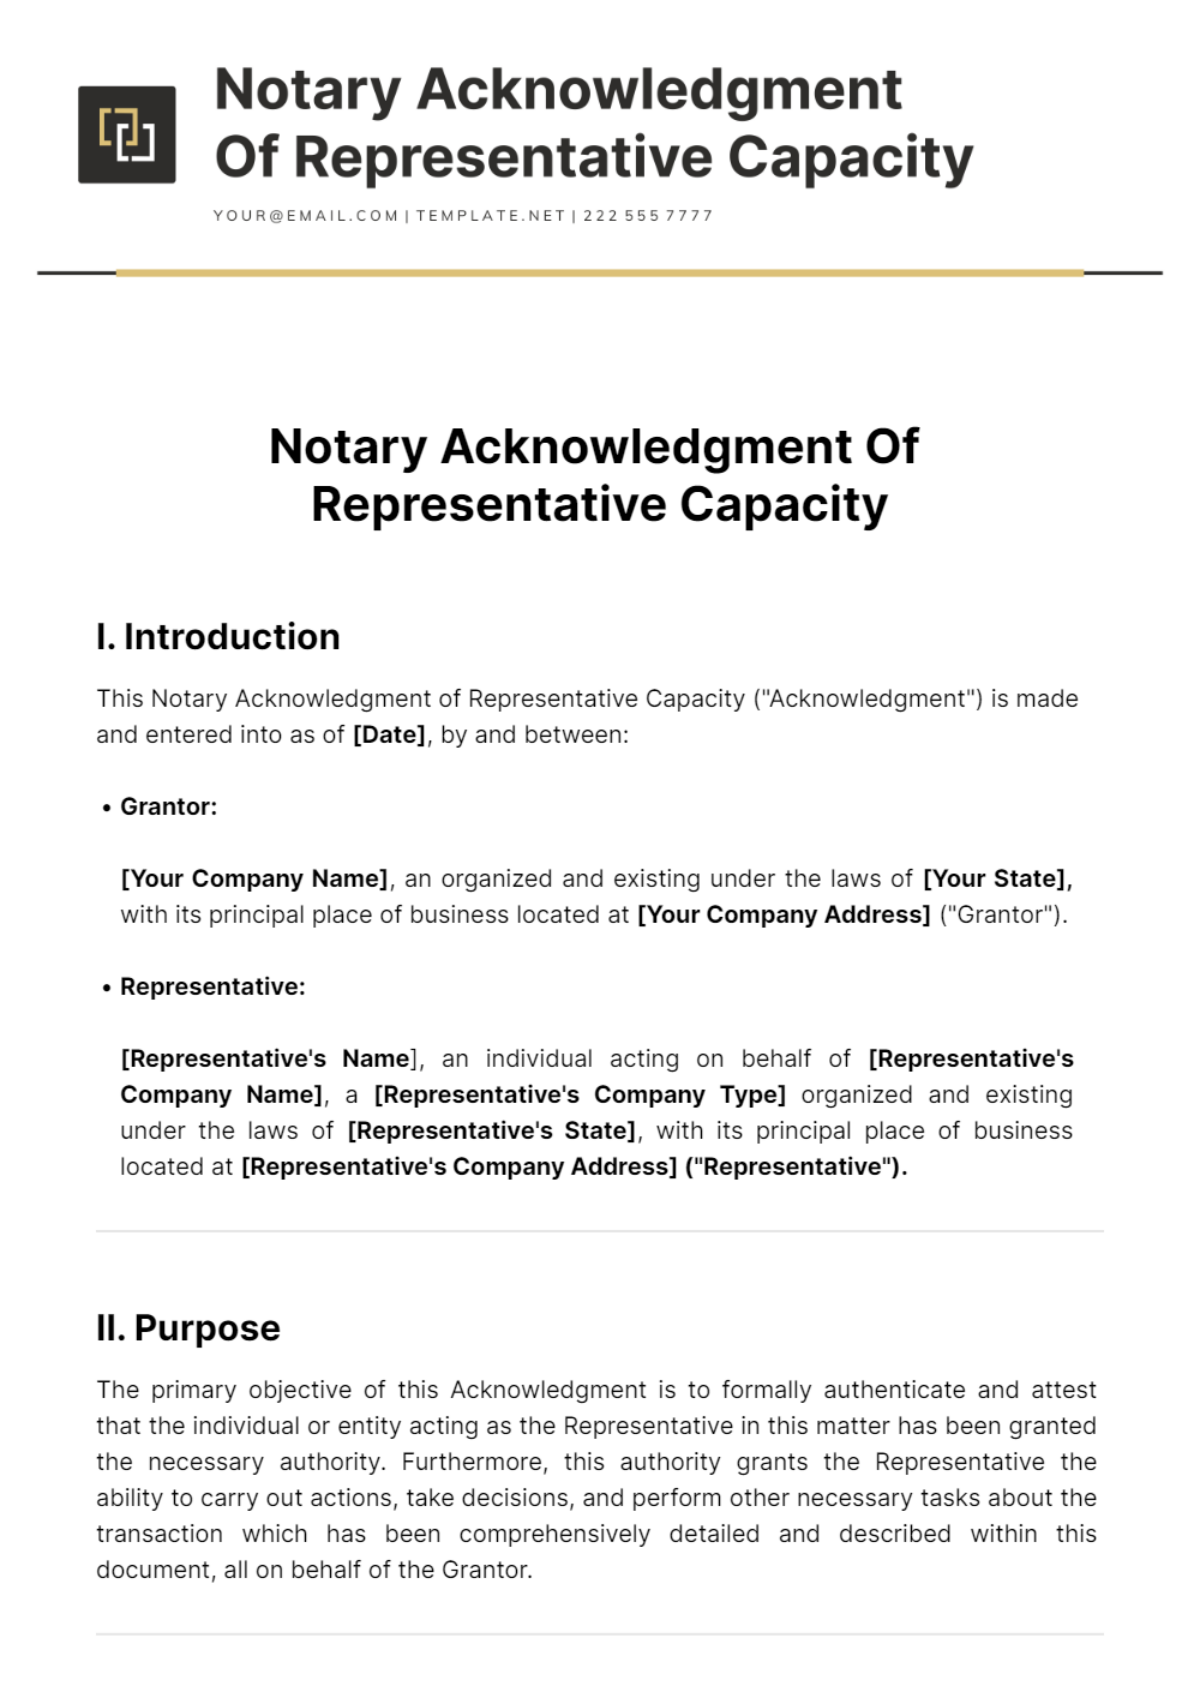 Notary Acknowledgment Of Representative Capacity Template